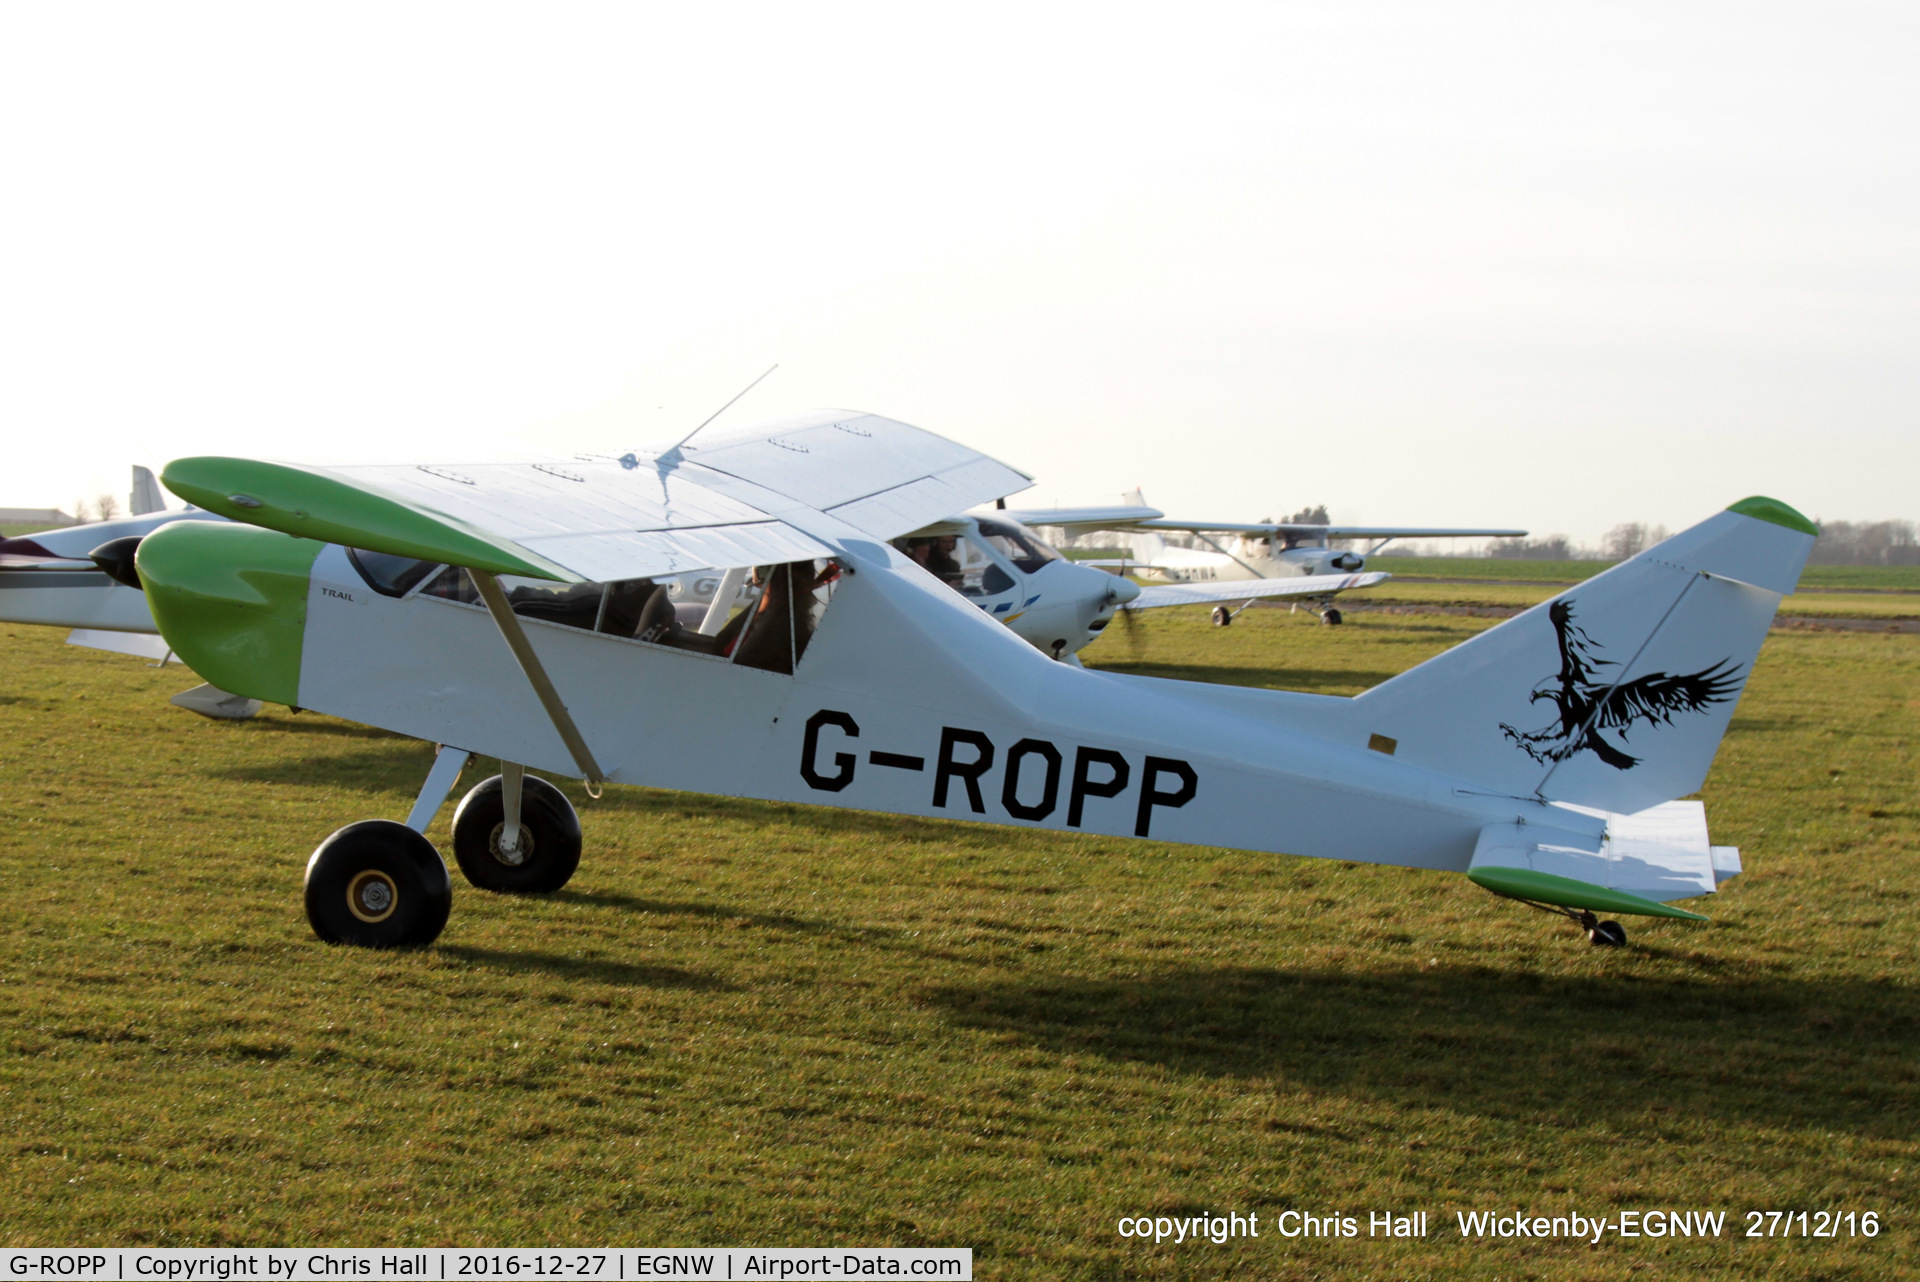 G-ROPP, 2012 Nando Groppo Trial C/N LAA 372-15178, at the Wickenby 